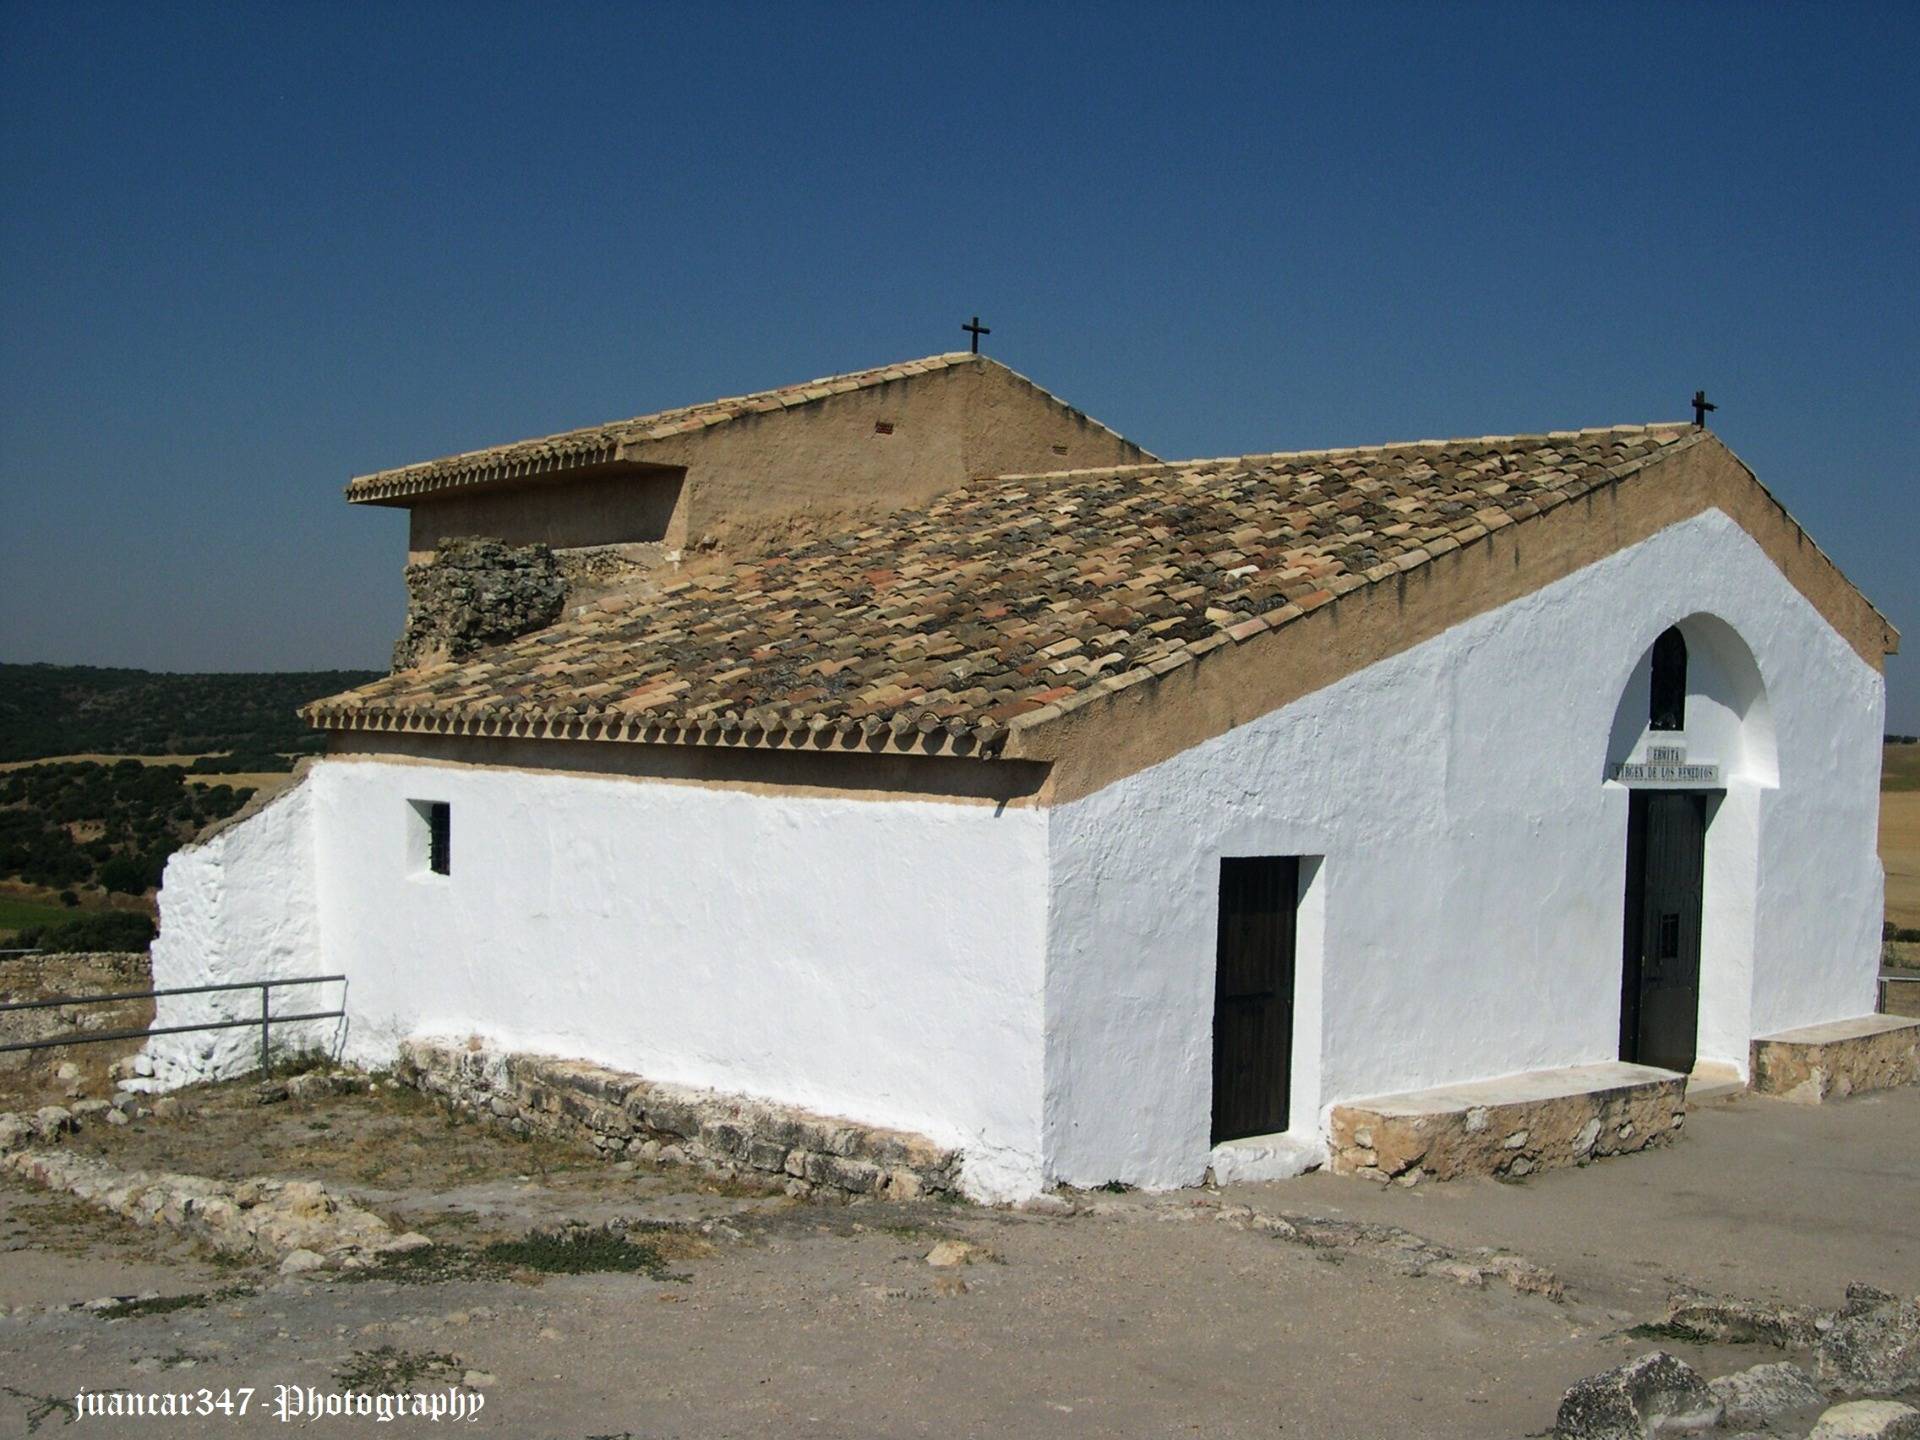 A Christian hermitage rising above the ancient pagan site